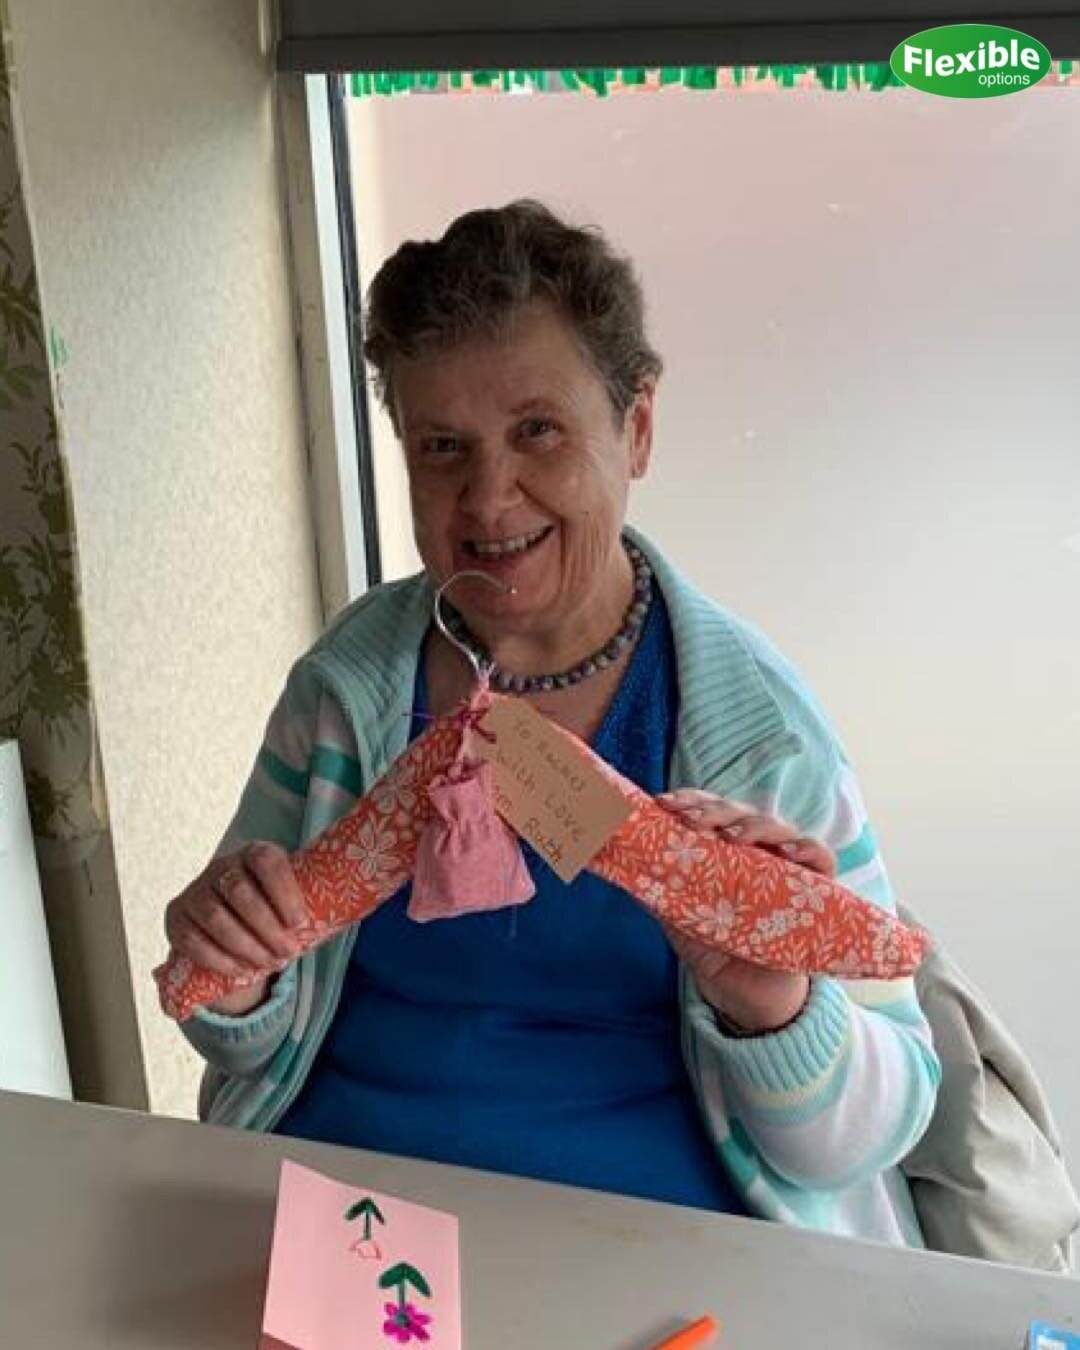 Great to see the super talented individuals at Alan House have finished their beautiful clothes hanger. You want to go and a get some jazzy attire to do the justice. Well done all.

#sewing #sewingproject #sewinglove #learningdisabilites